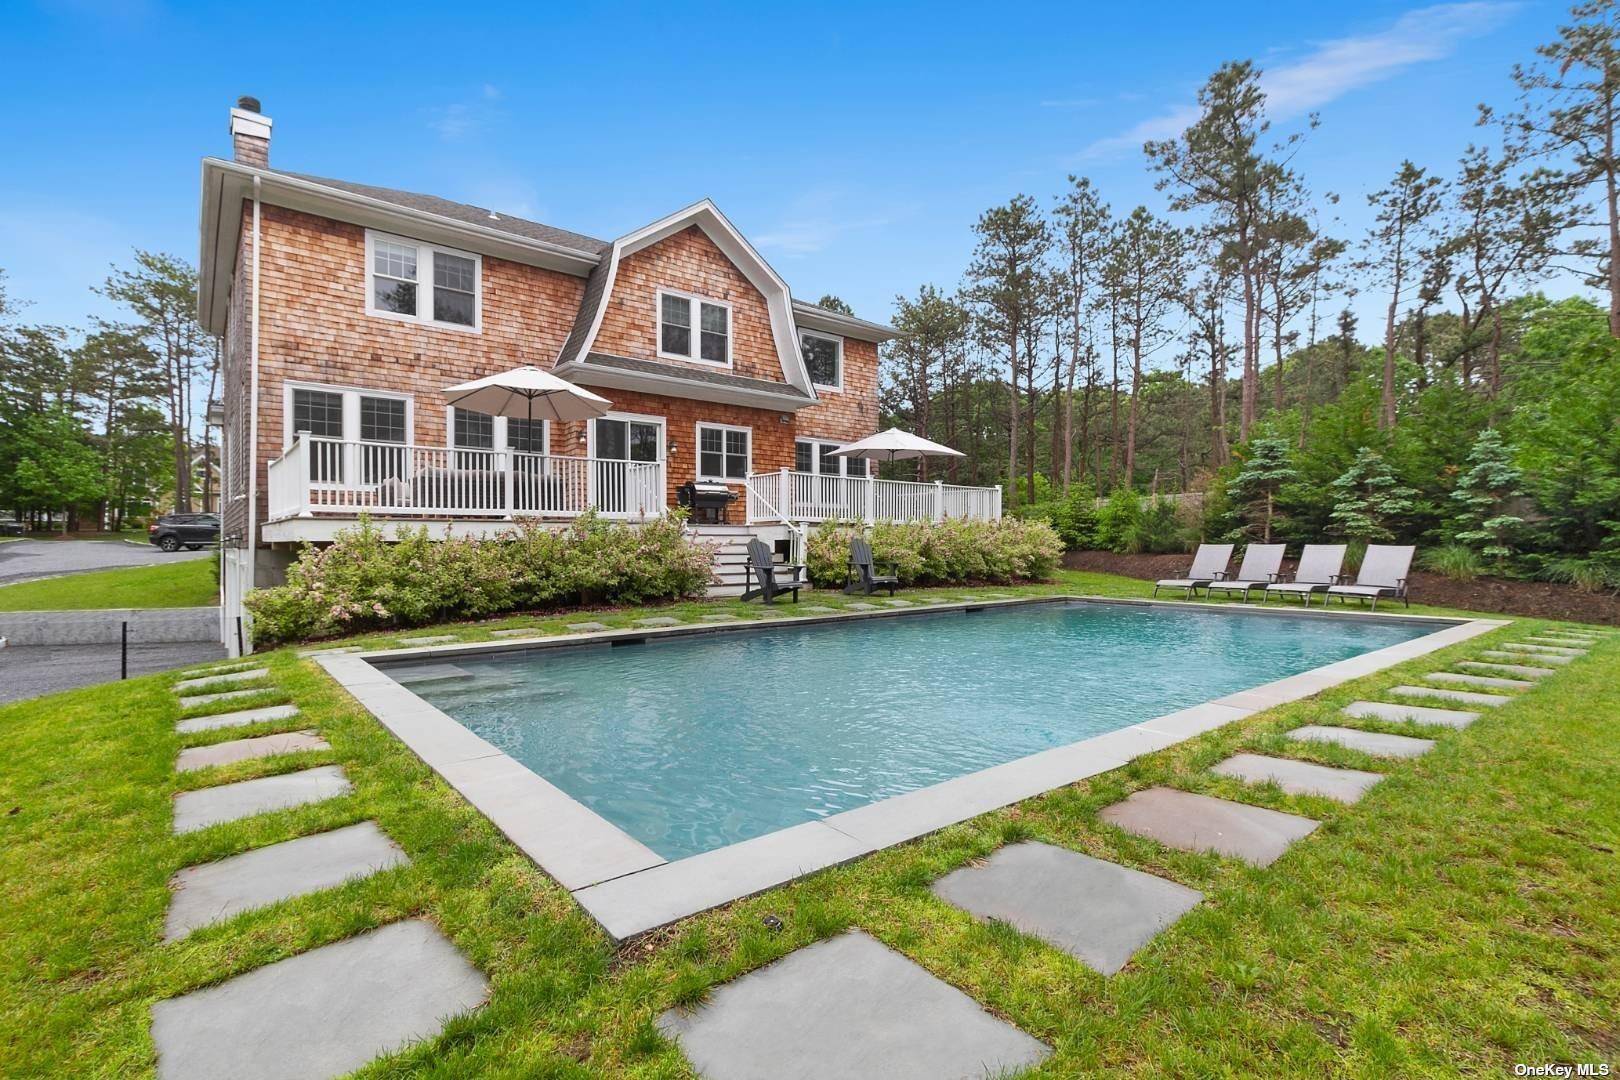 Escape this summer to the Hamptons in this fully outfitted open living five bedroom fabulous dream home.